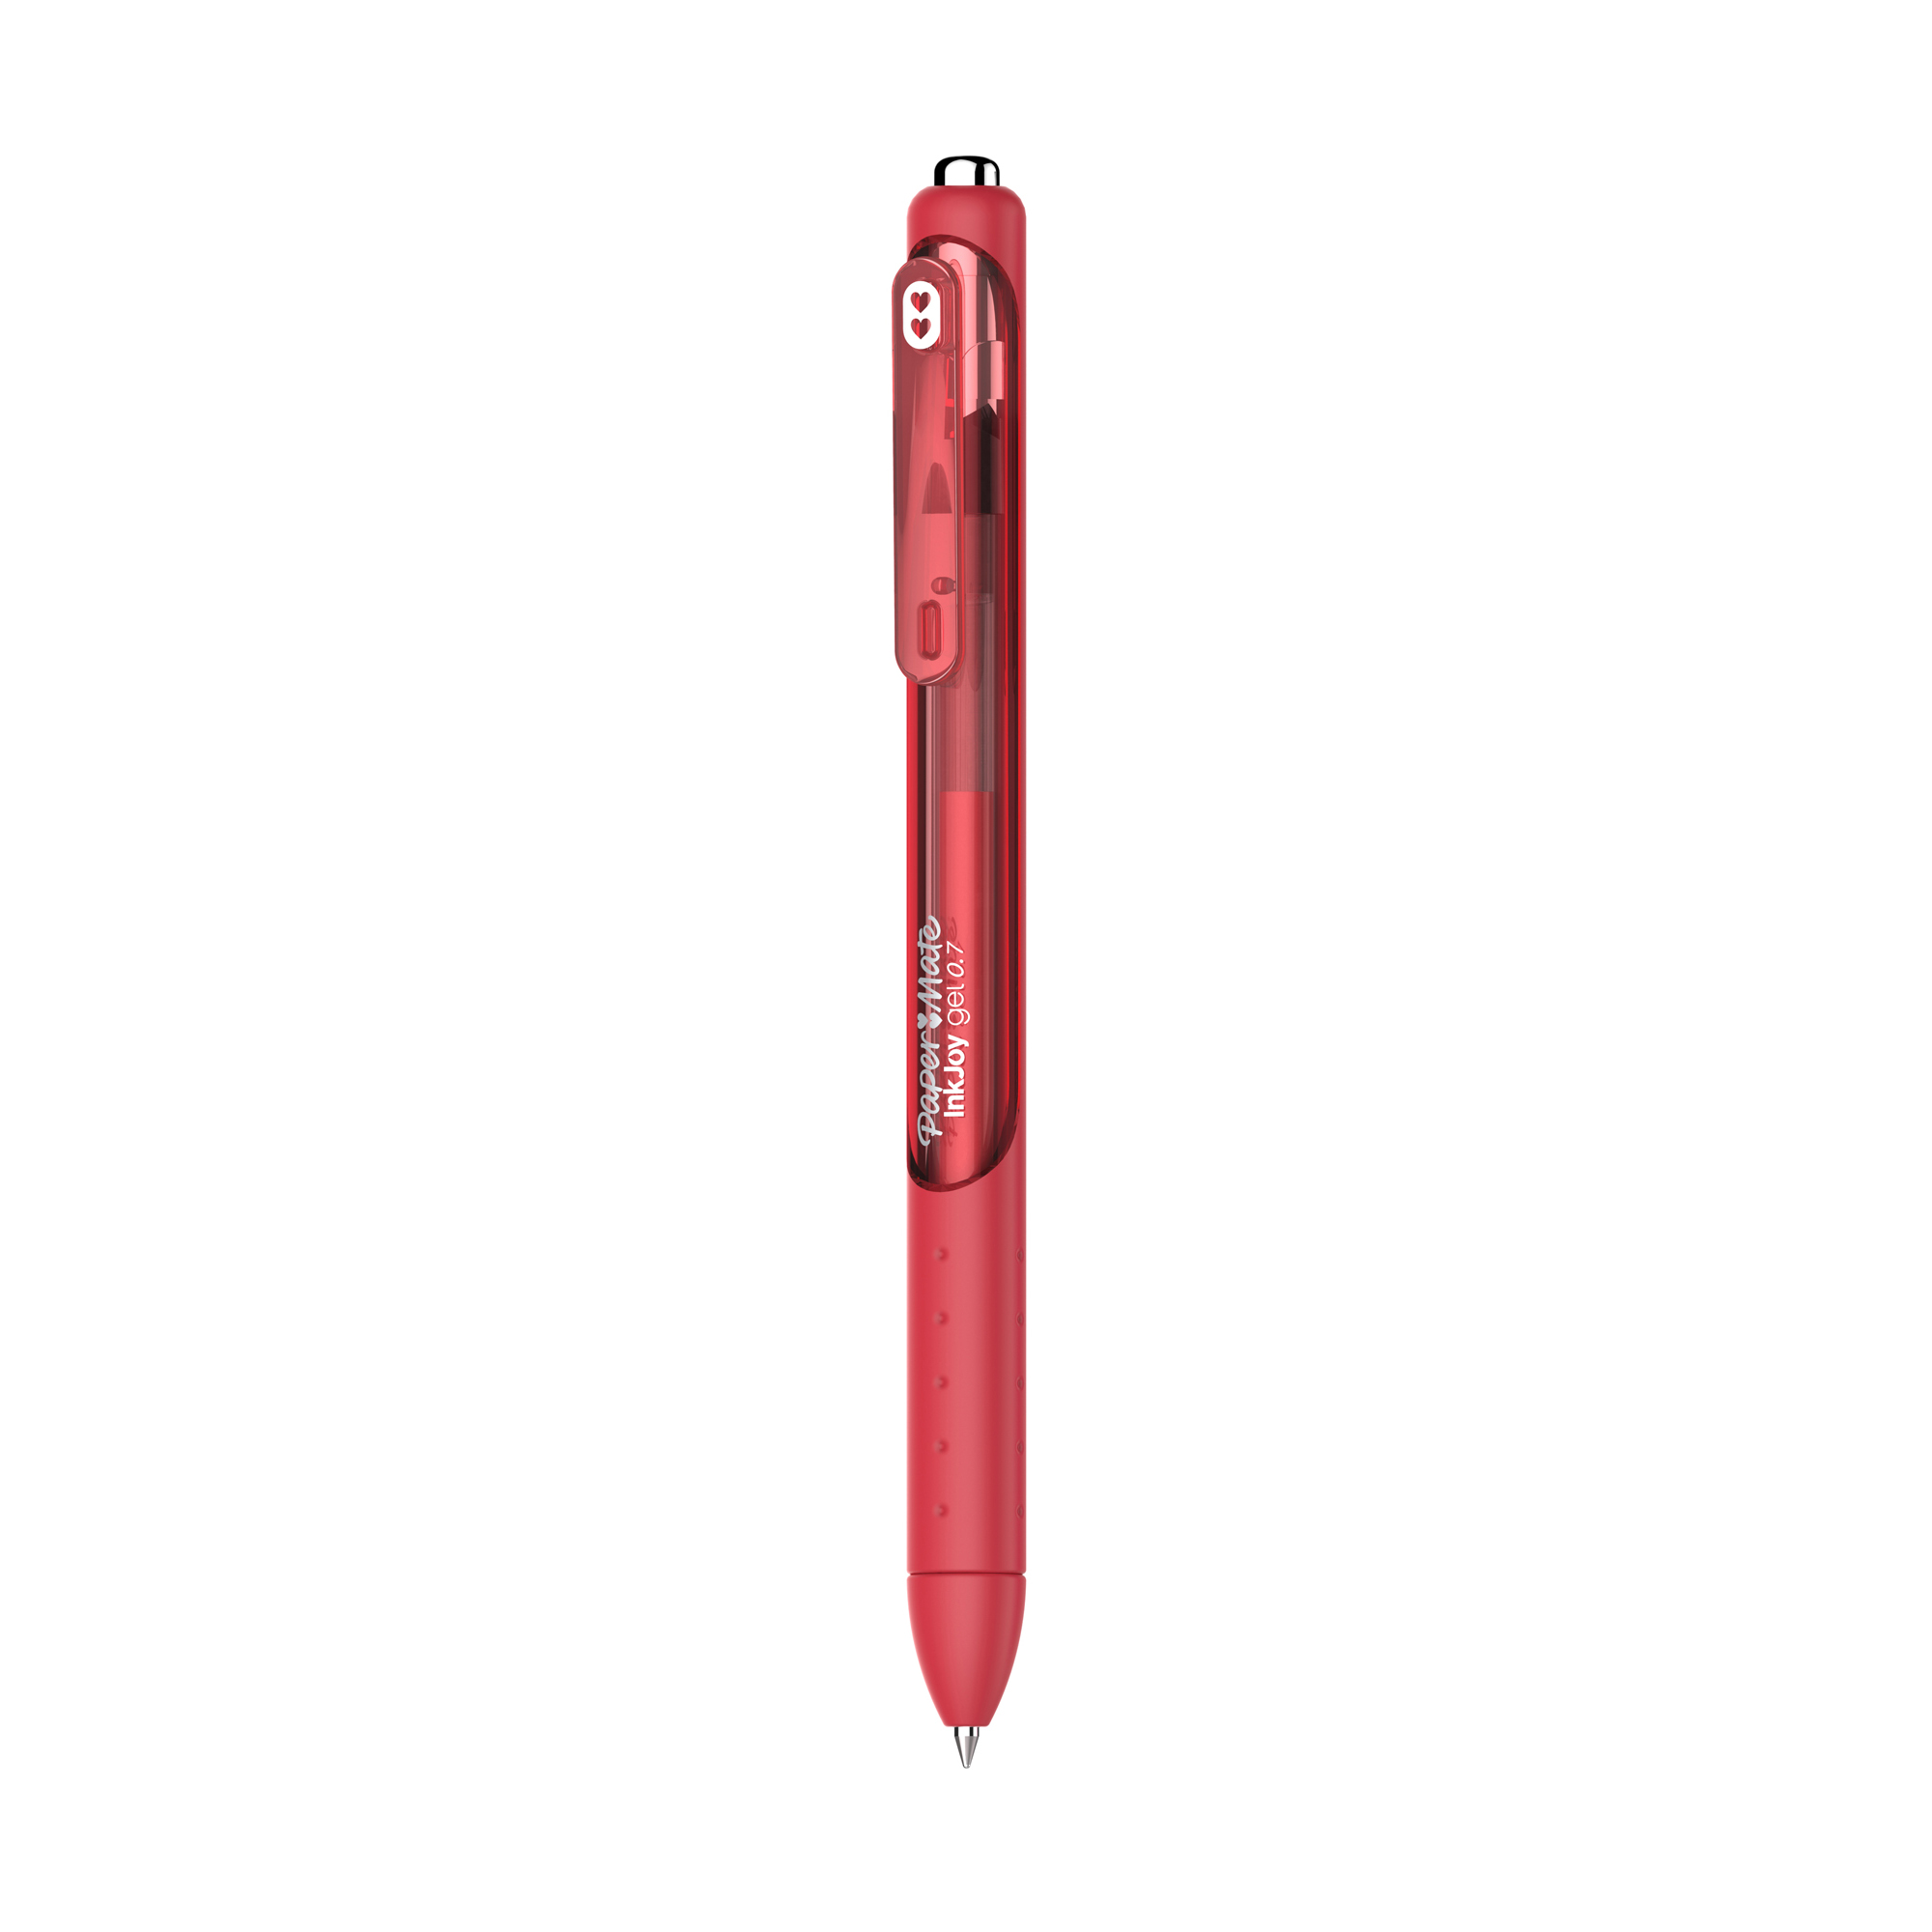 Penna Sfera Scatto Inkjoy Gel 0 7mm Rosso Papermate 1957056 3501179579726